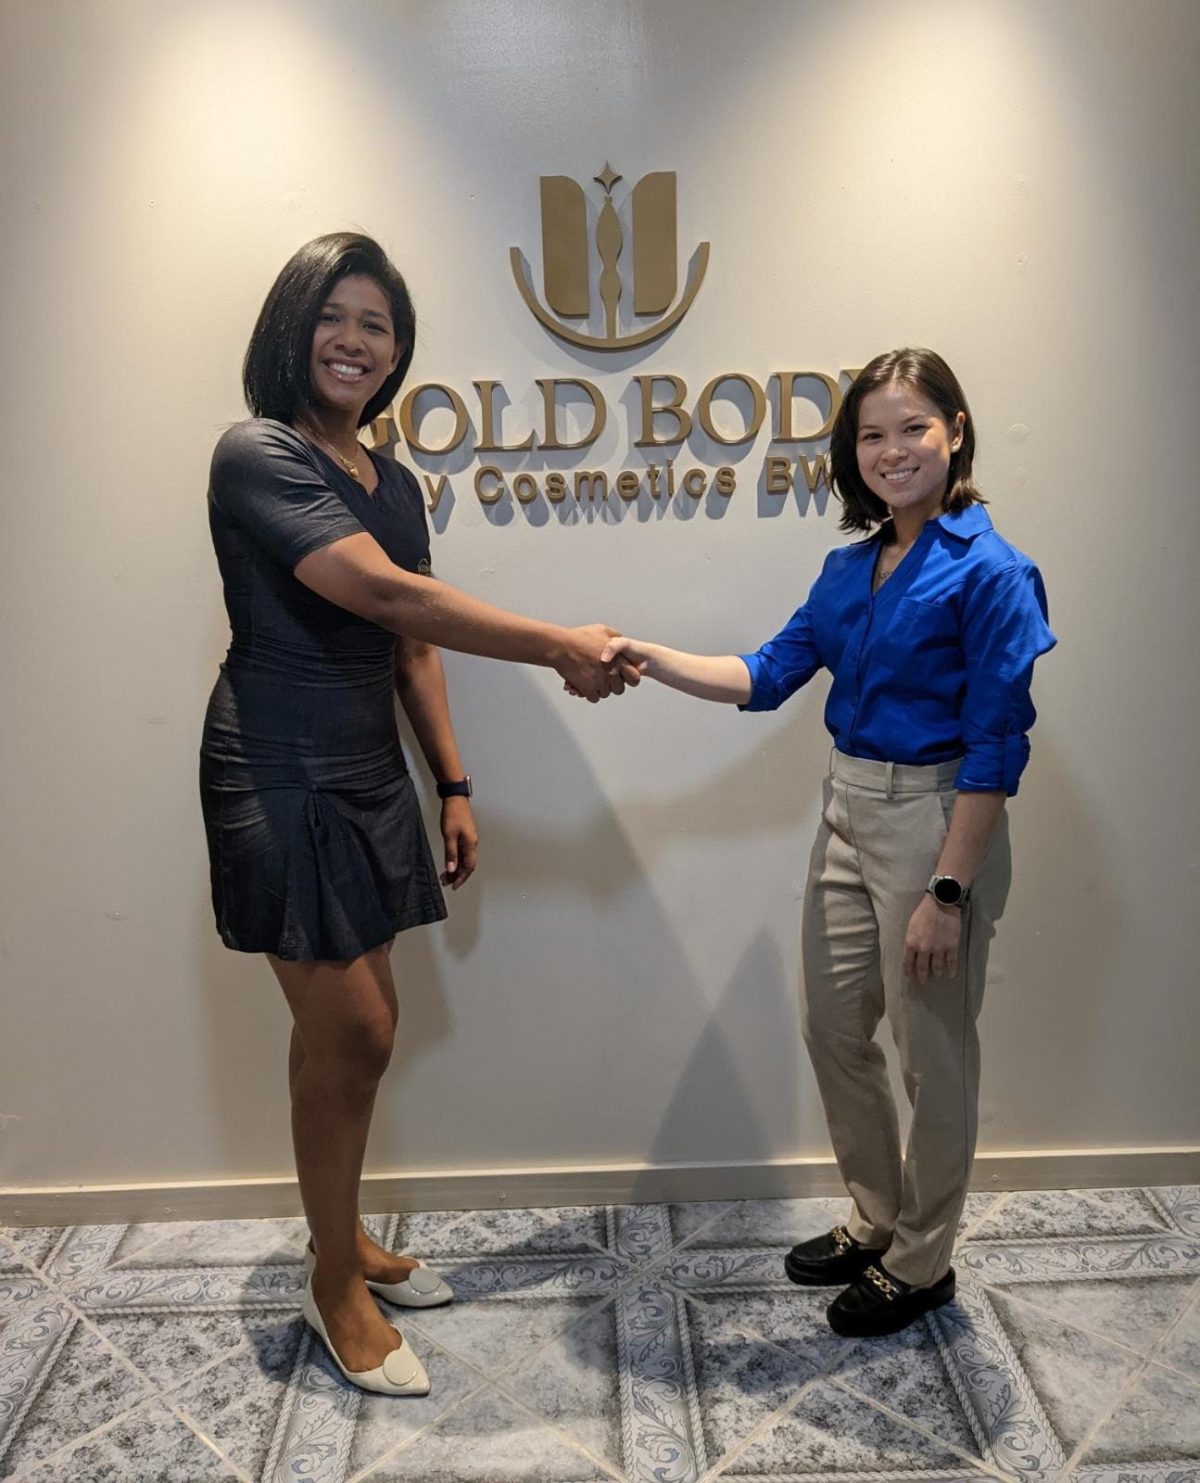 Camille Da Cunha (left), Executive Director of Gold Body by Cosmetics BW presenting to representative of the Kares Caribbean Crossfit Championship, Mary Fung-A-Fat 